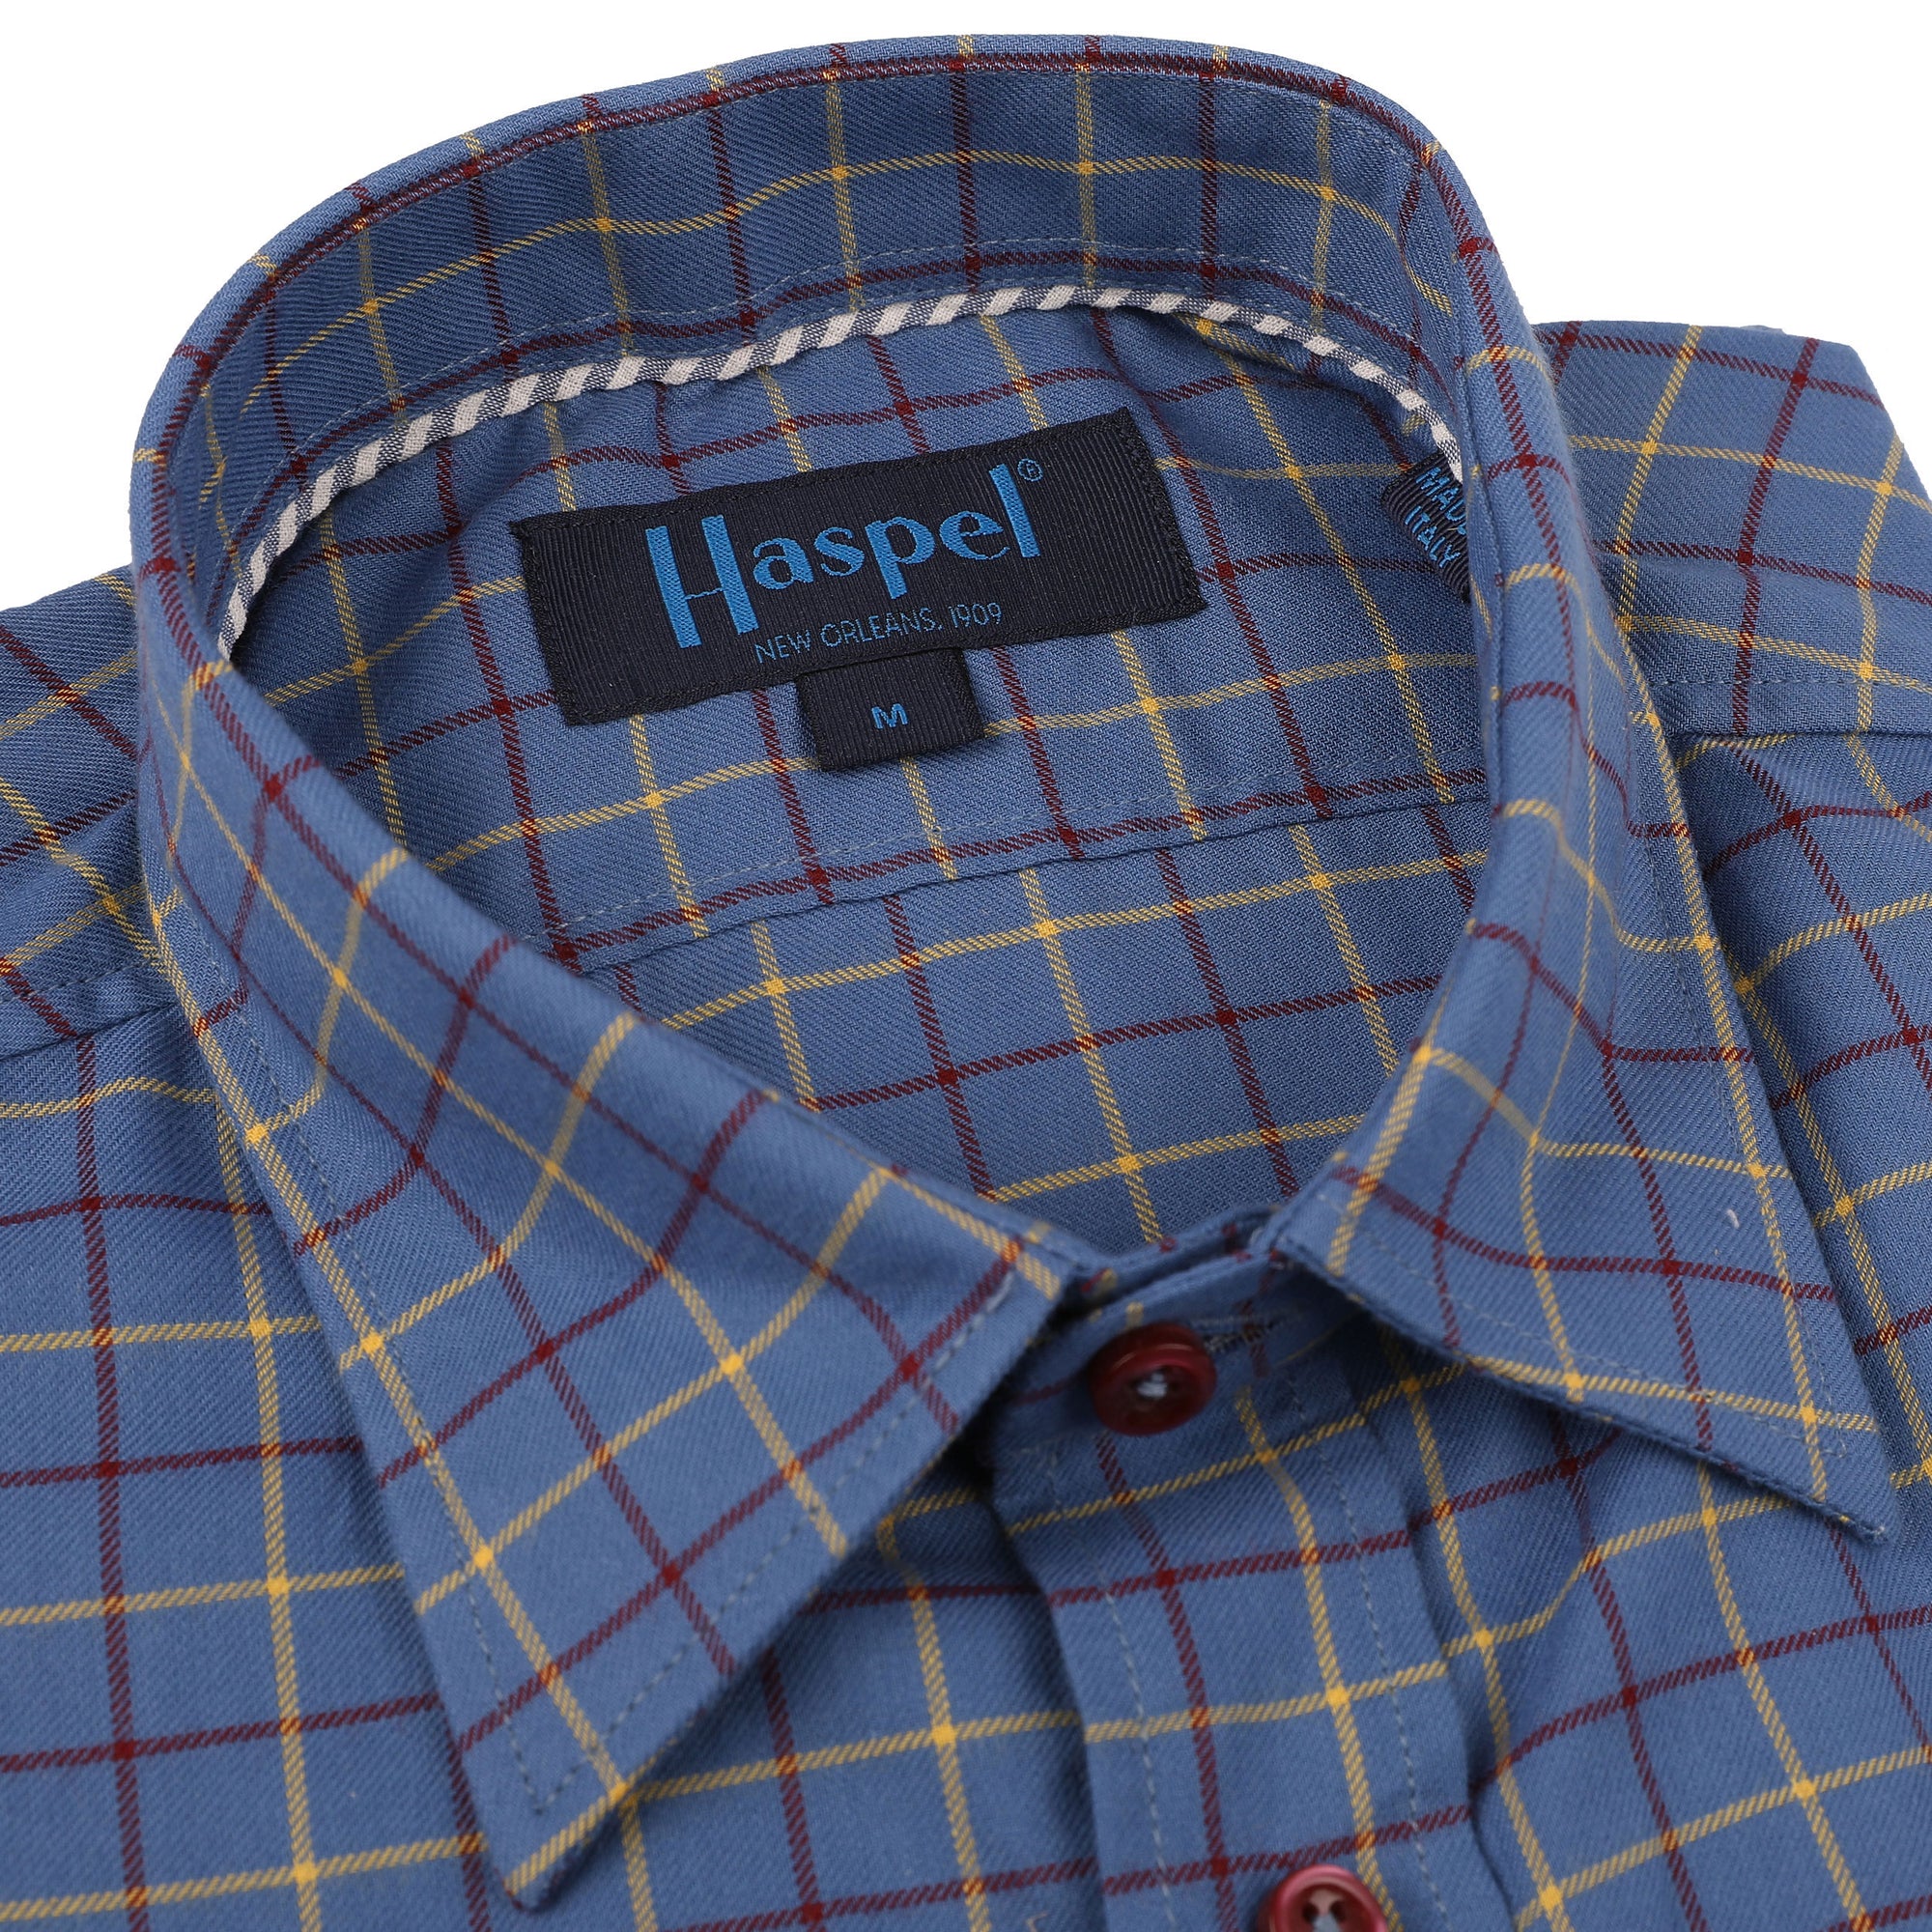 Our Treme Blue with Burgundy & Yellow Brushed Check is a stylish option for fall. The brushed check pattern mixes the cool blue hue with warm burgundy and yellow tones, creating a look that is both sophisticated and modern.  100% Cotton • Hidden Button Collar • Long Sleeve • Chest Pocket • Machine Washable • Made in Italy • Return Policy